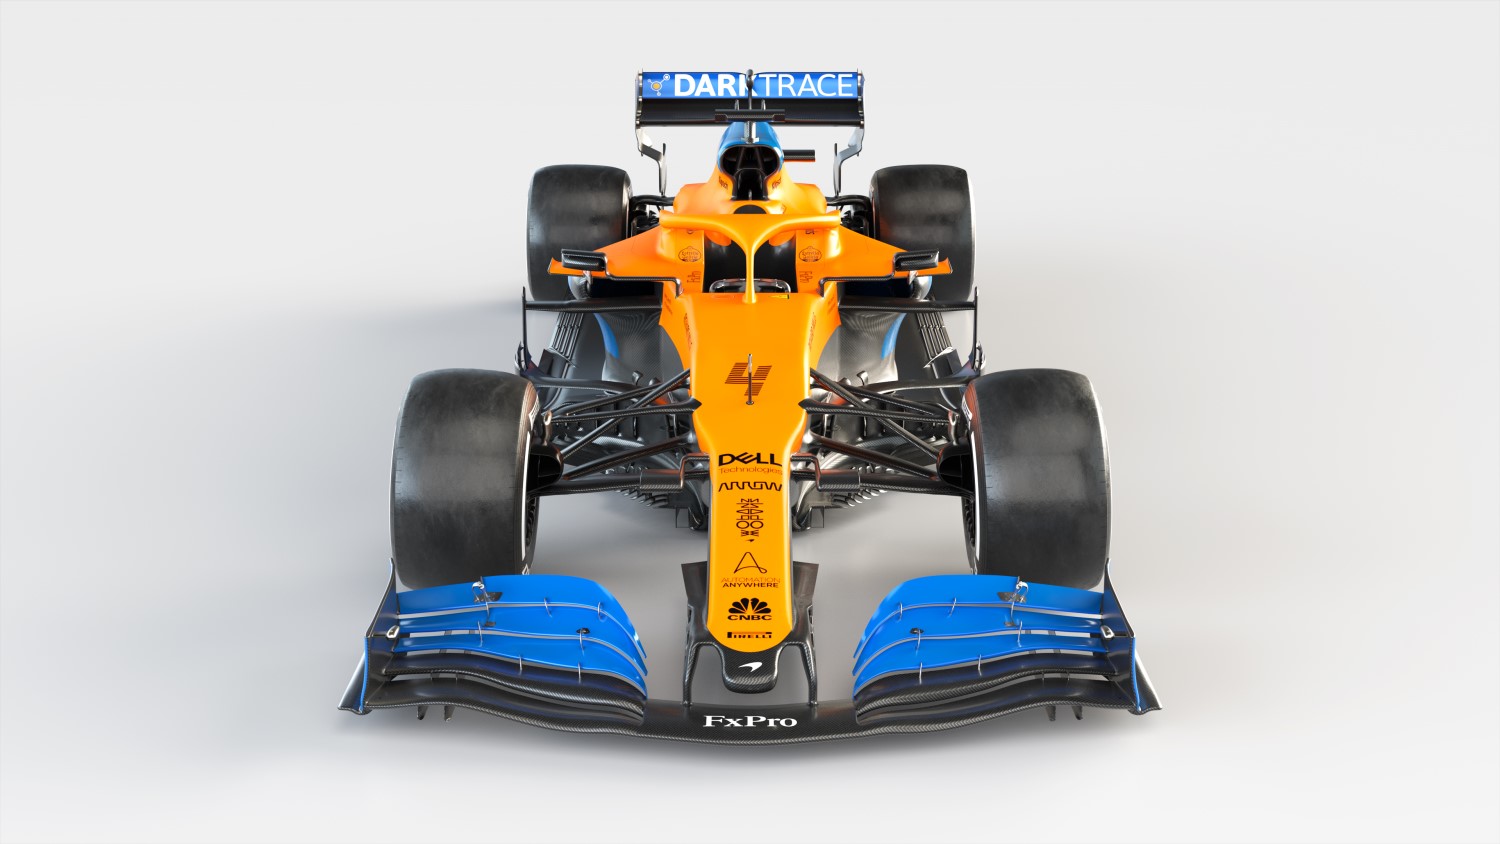 McLaren must spend the money to design the 2021 car to fit the Mercedes engine before the budget cuts go into effect.